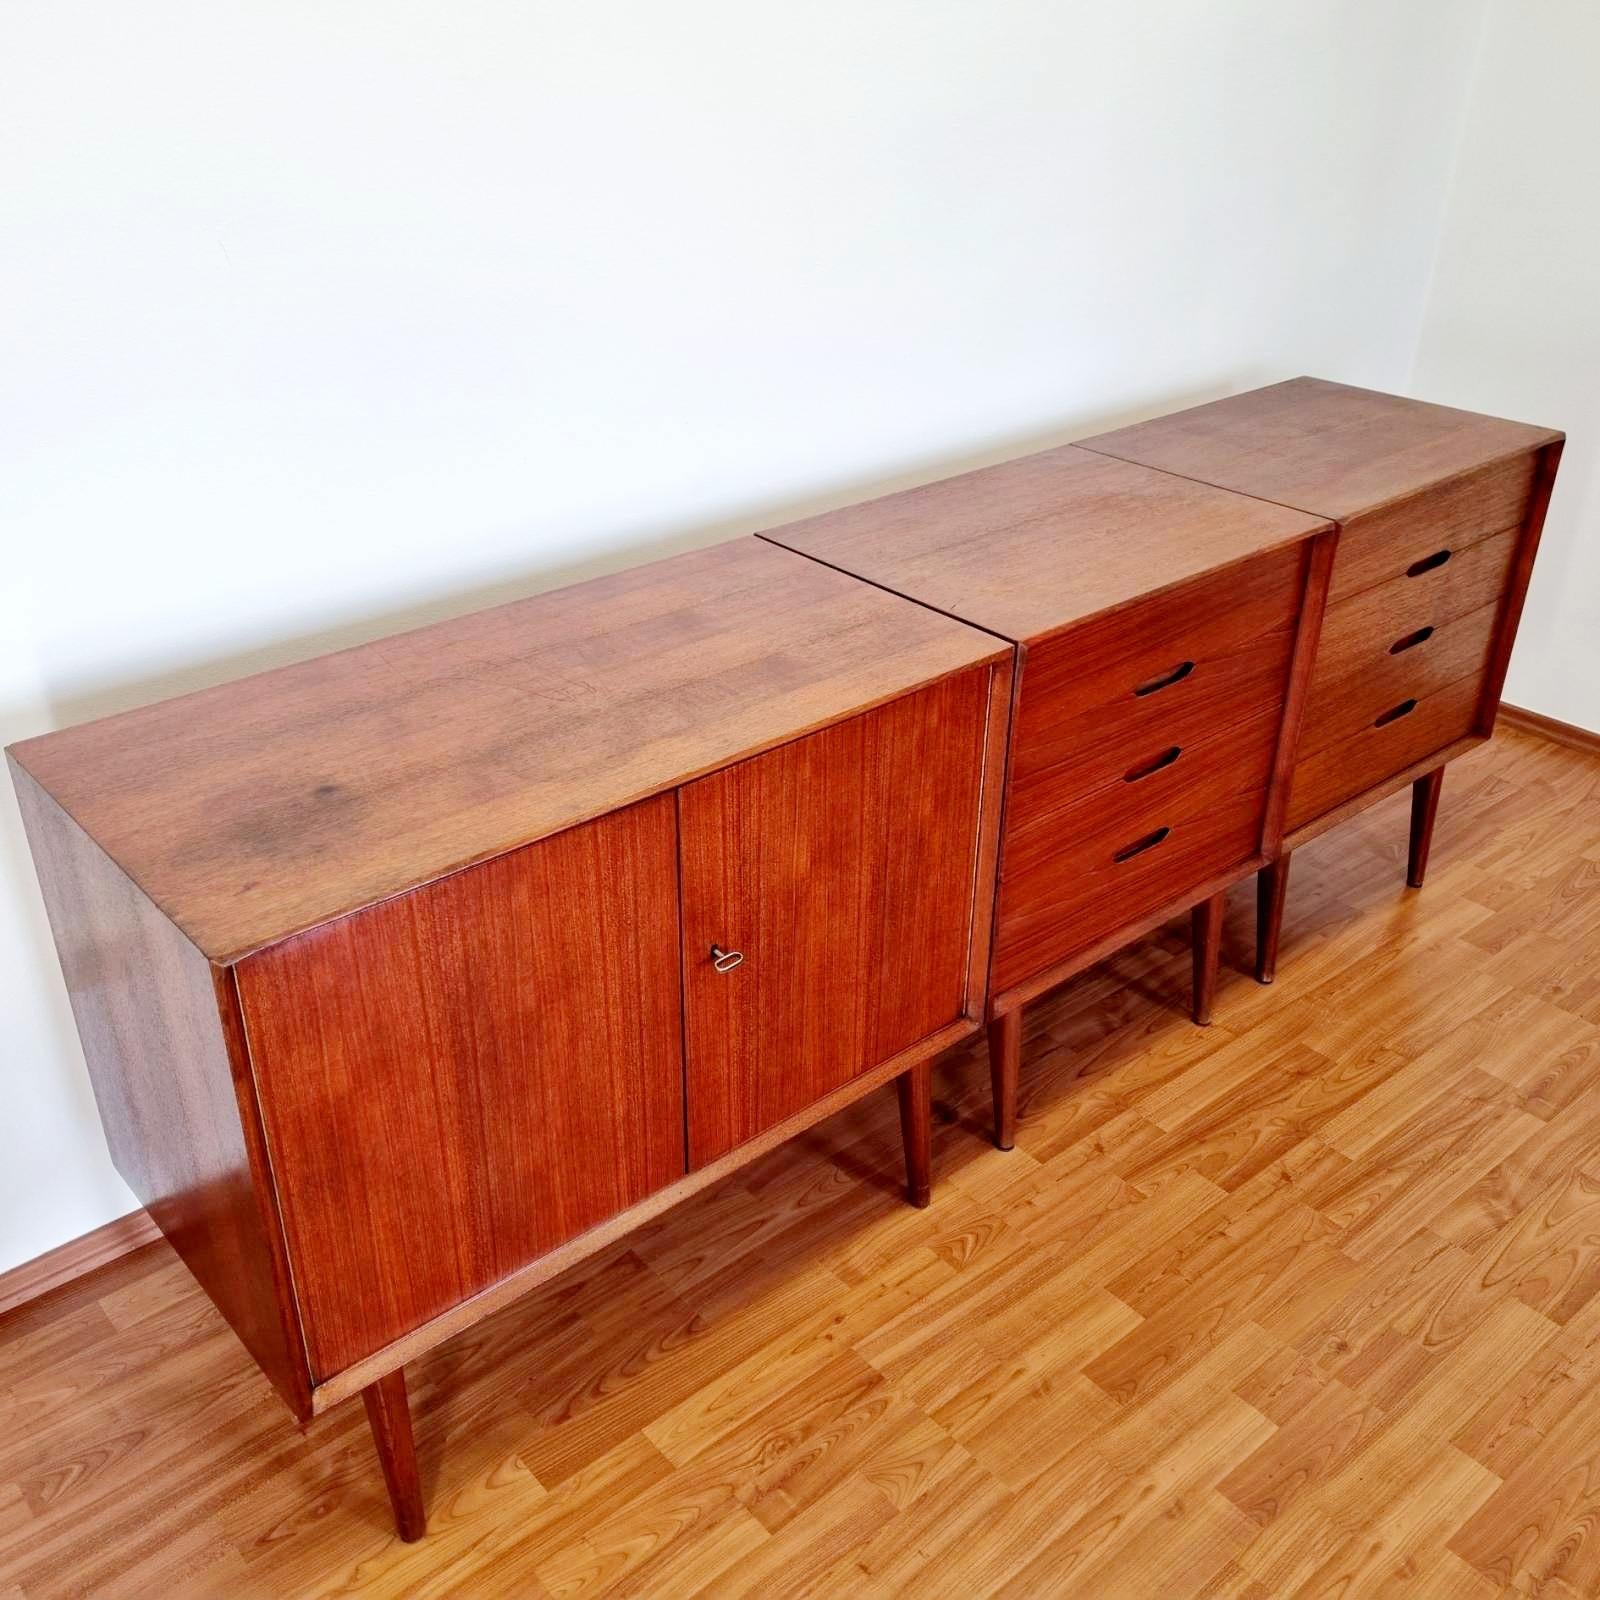 Mid-20th Century Mid-Century Modular Sideboard in Teak by Rex Raab for Wilhelm Renz, Germany, 60s For Sale